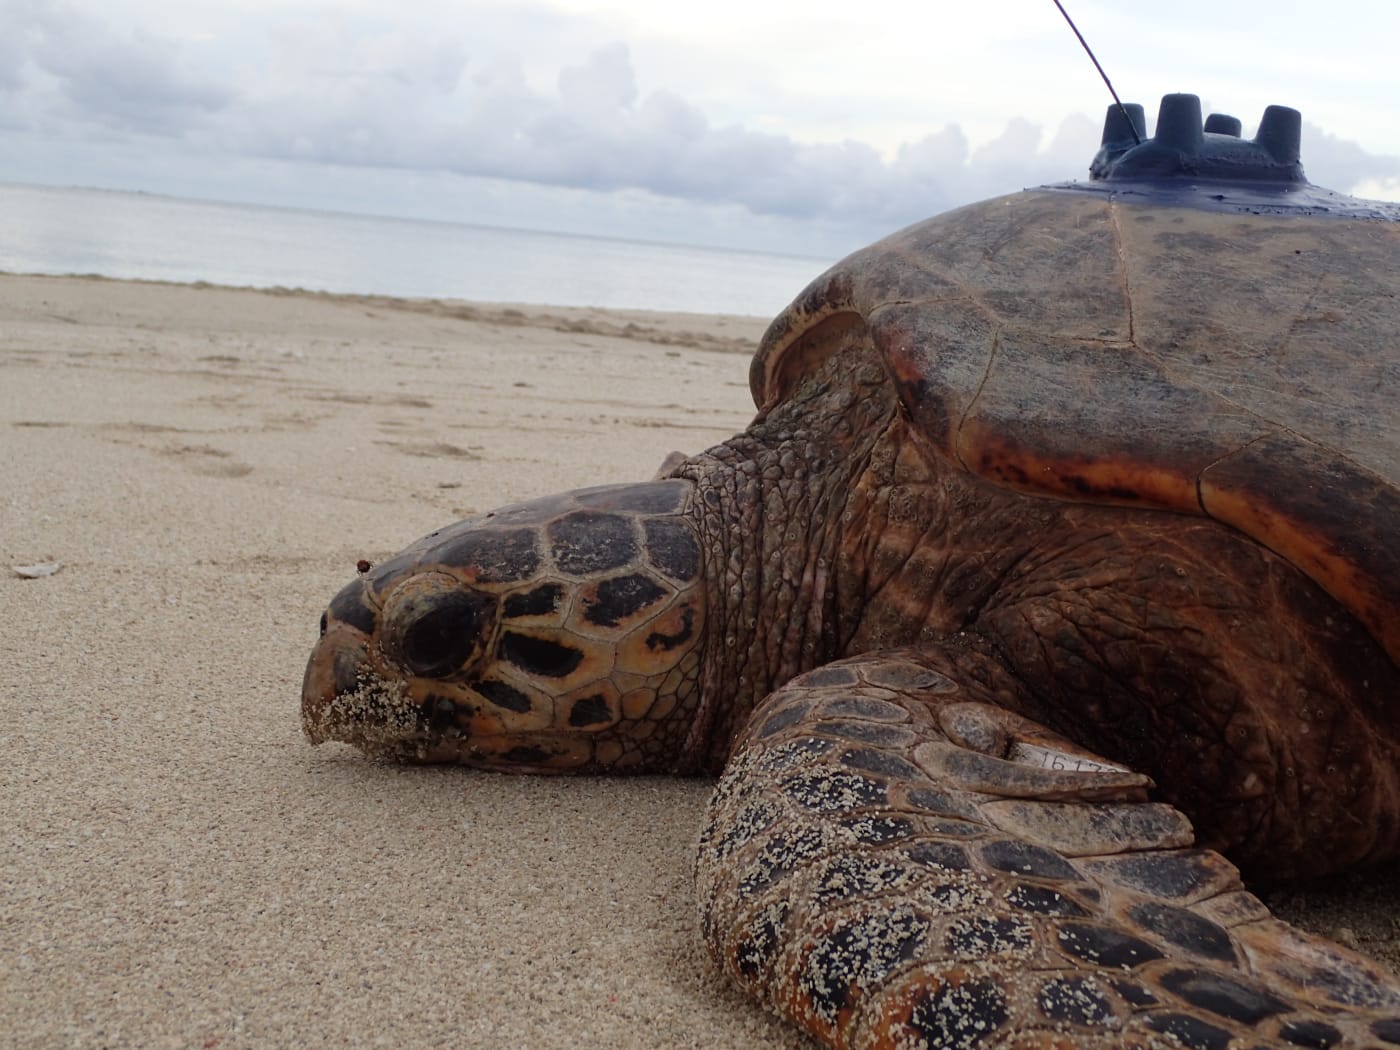 Hawksbill turtle K33408 making its way back to the water with new tracker.
In February 2017, WWF-Australia worked with Apudthama Indigenous Rangers and the Department of Environment and Heritage Protection to attach satellite transmitters to ten hawksbill turtles on Milman Island. The satellites are used to gather data about where the turtles feed, which reefs they prefer, what paths they take, and what threats they’re facing, which allows WWF and its partners to protect them more effectively.